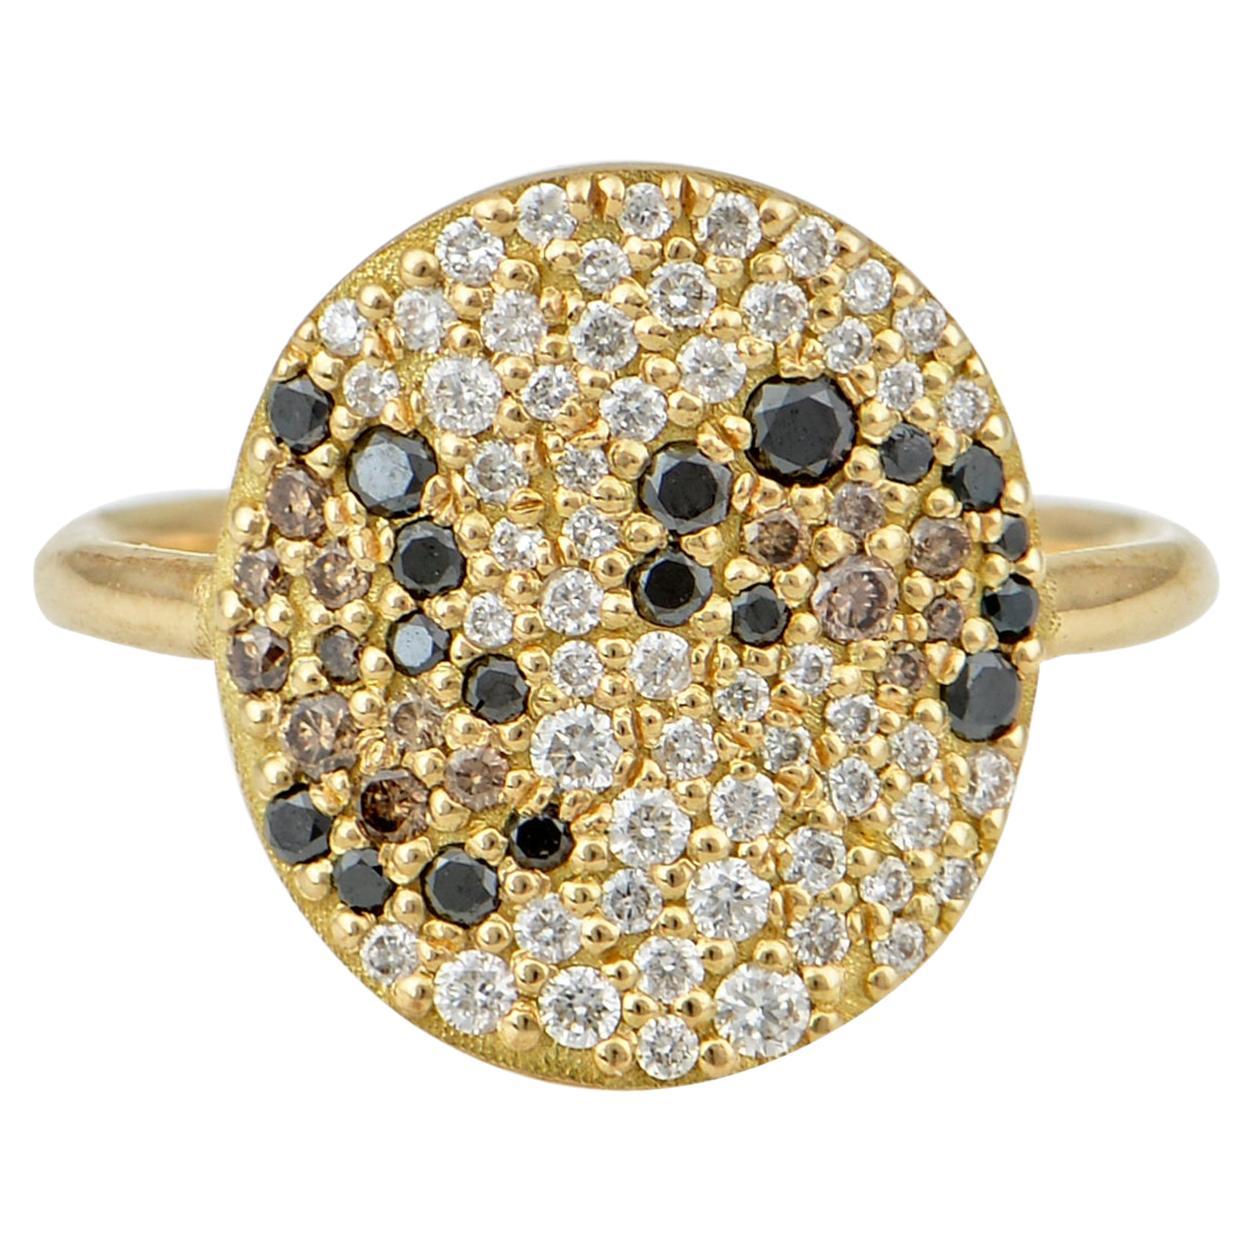 Leopoard Print Signet Ring In 18 Karat Gold with Diamonds For Sale